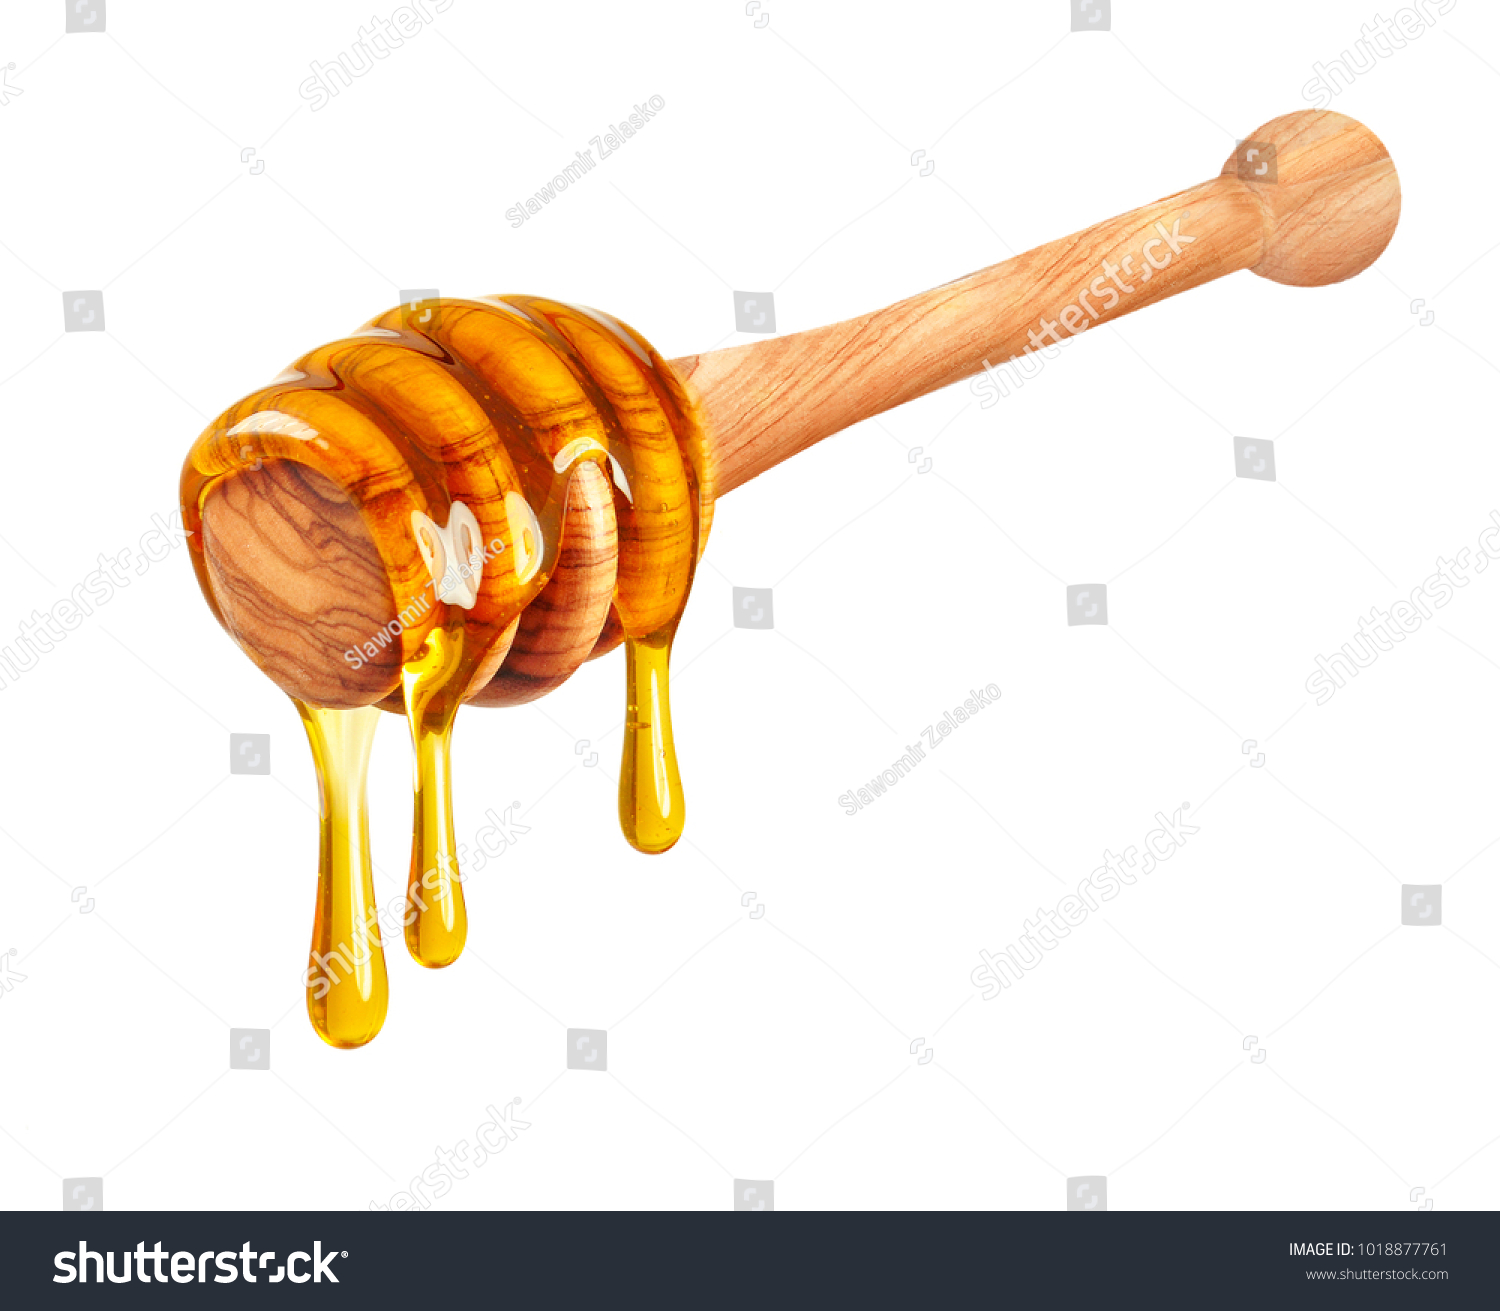 honey dripping isolated on white background #1018877761